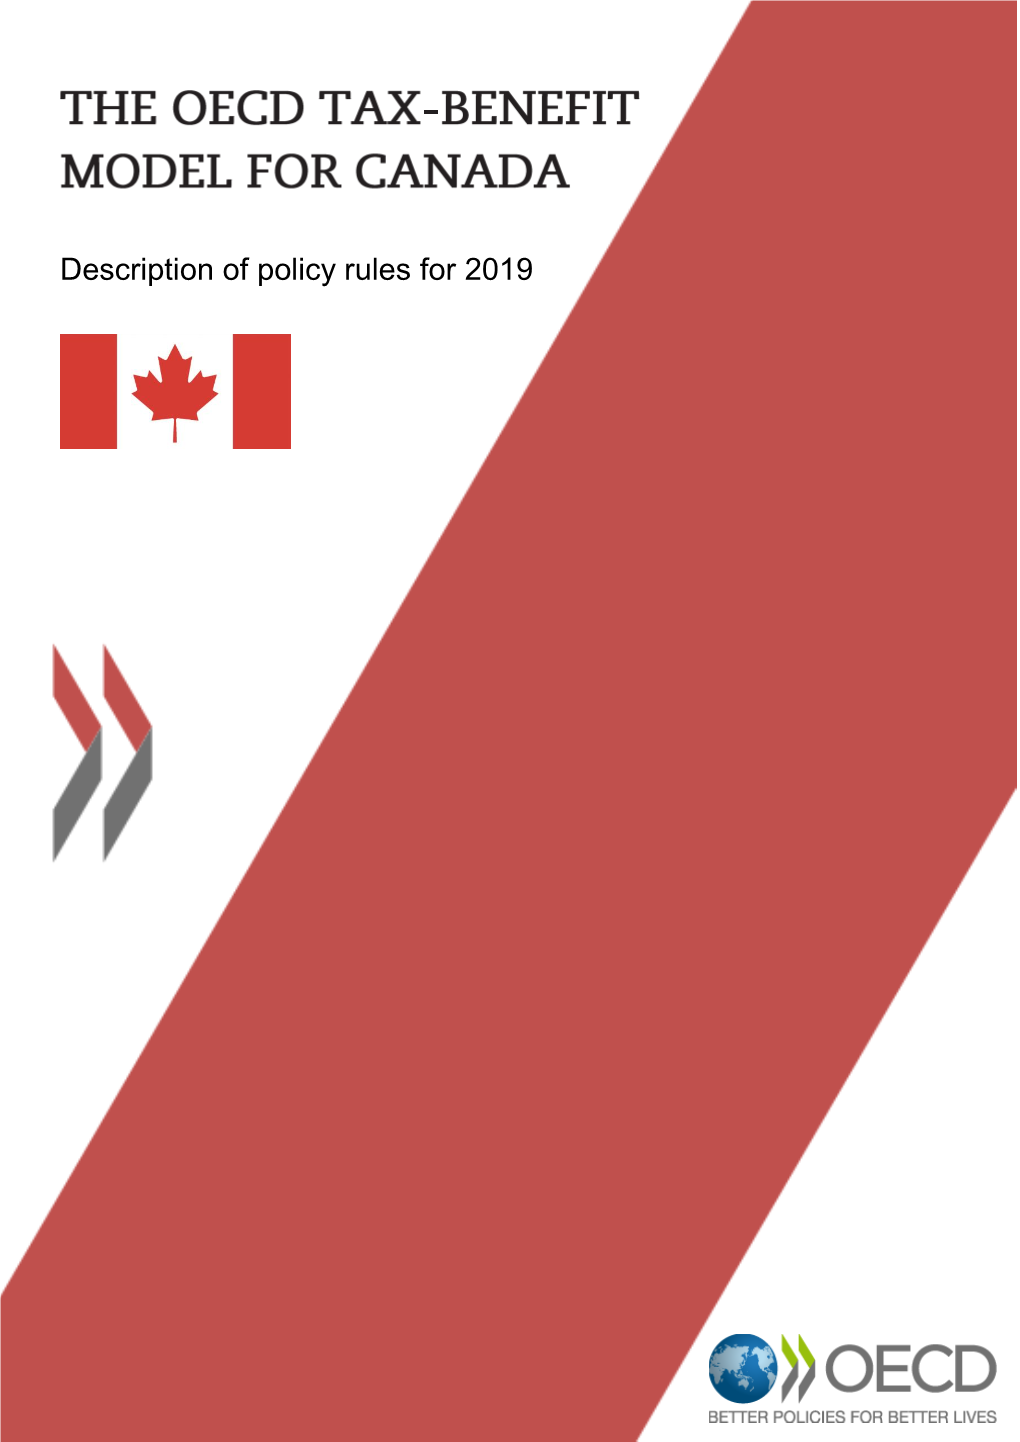 The OECD Tax-Benefit Model for Canada: Description of Policy